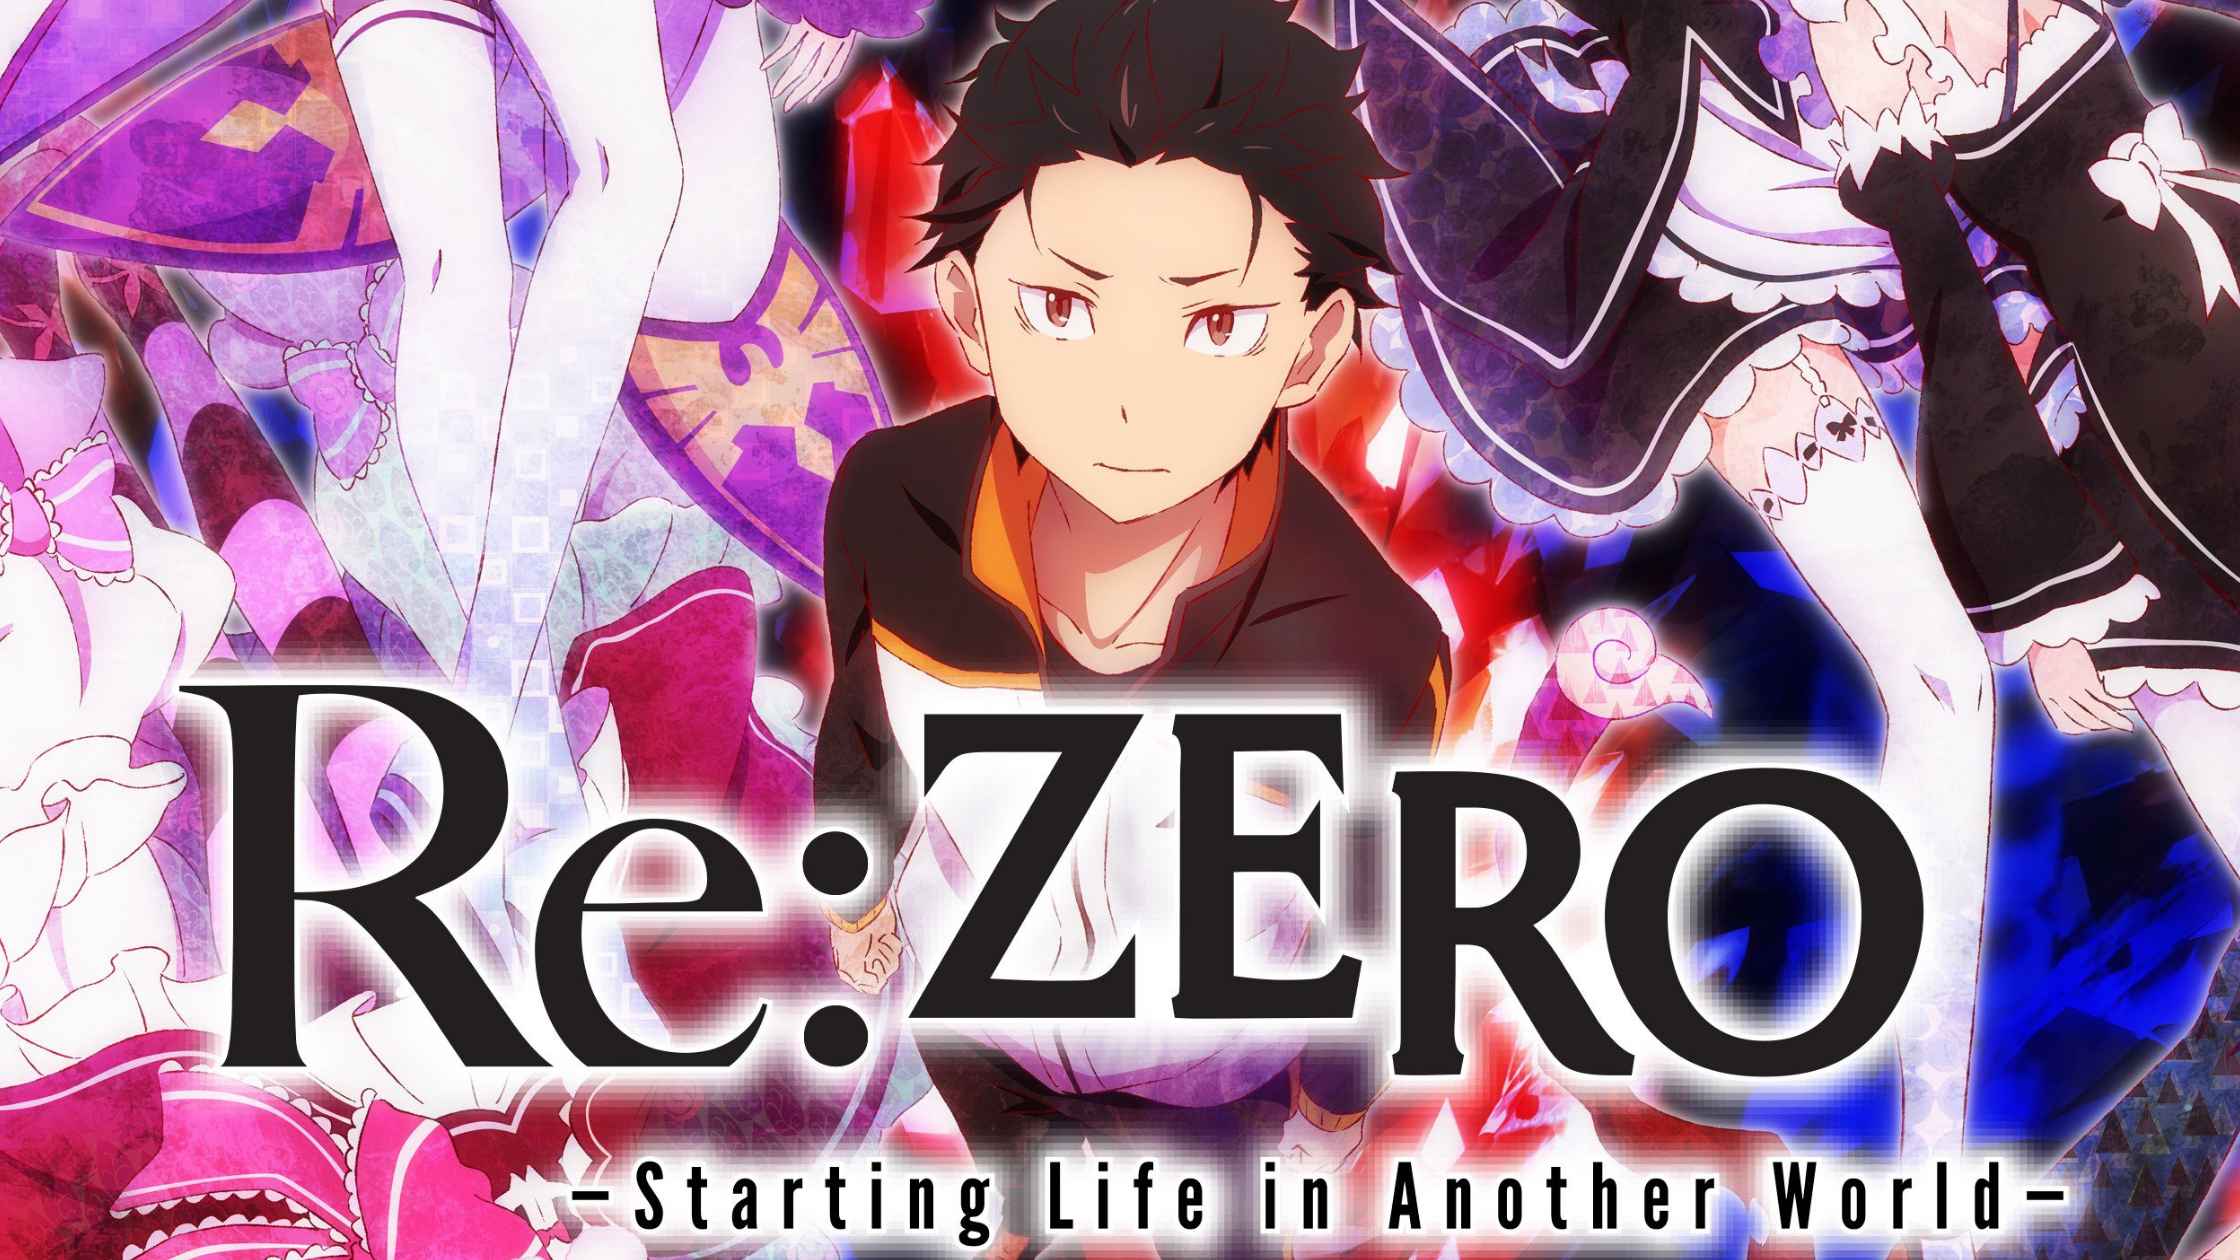 Want To Know The Right Order To Watch Re Zero Anime Here’s Your Watch Order Guide